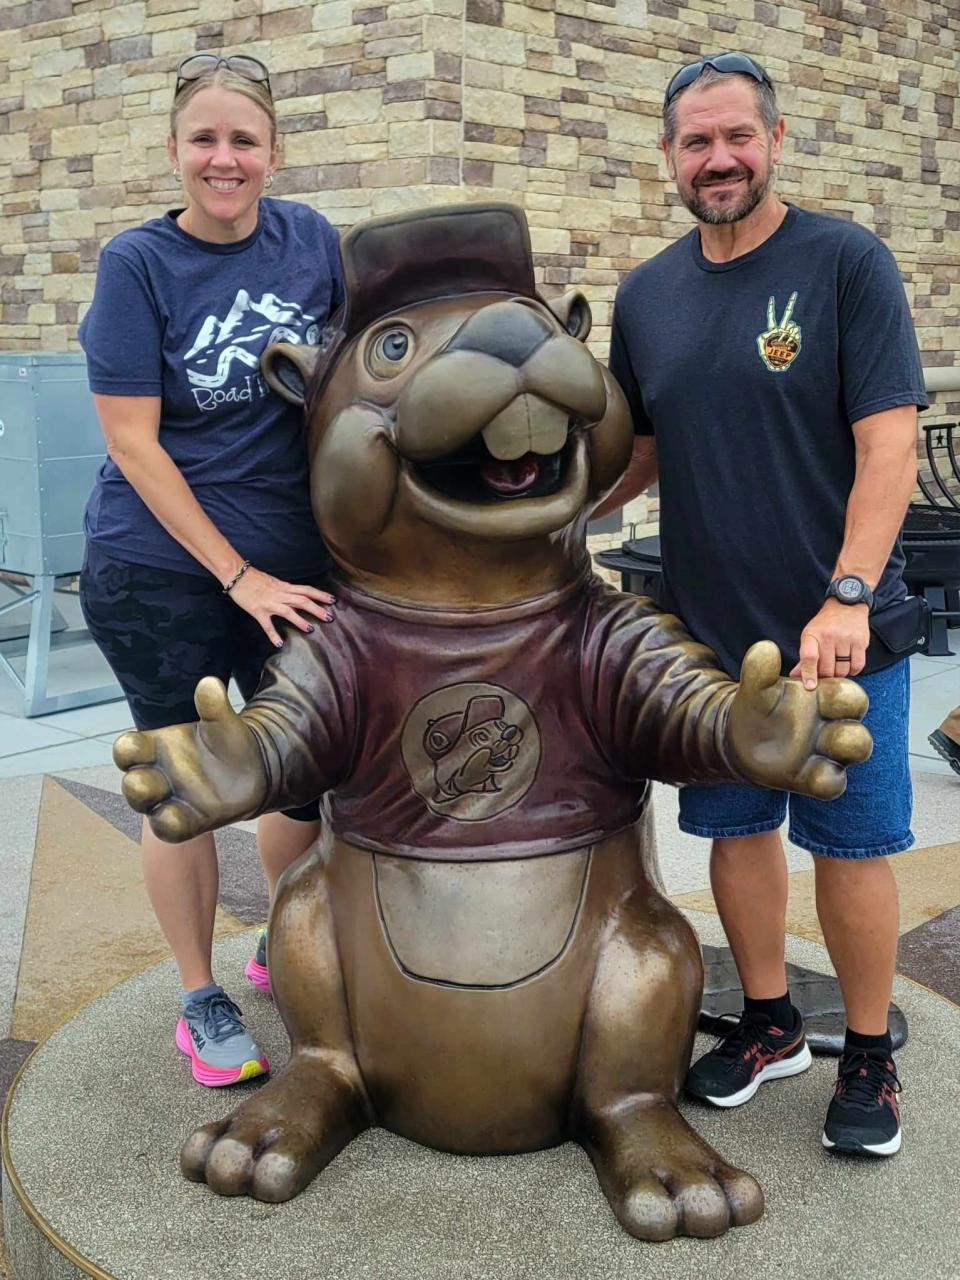 Jen Emig, left, and her husband Roger Emig pose for a photo with a Buc-ee's statue outside of the Buc-ee's travel center in Sevierville, Tennessee.